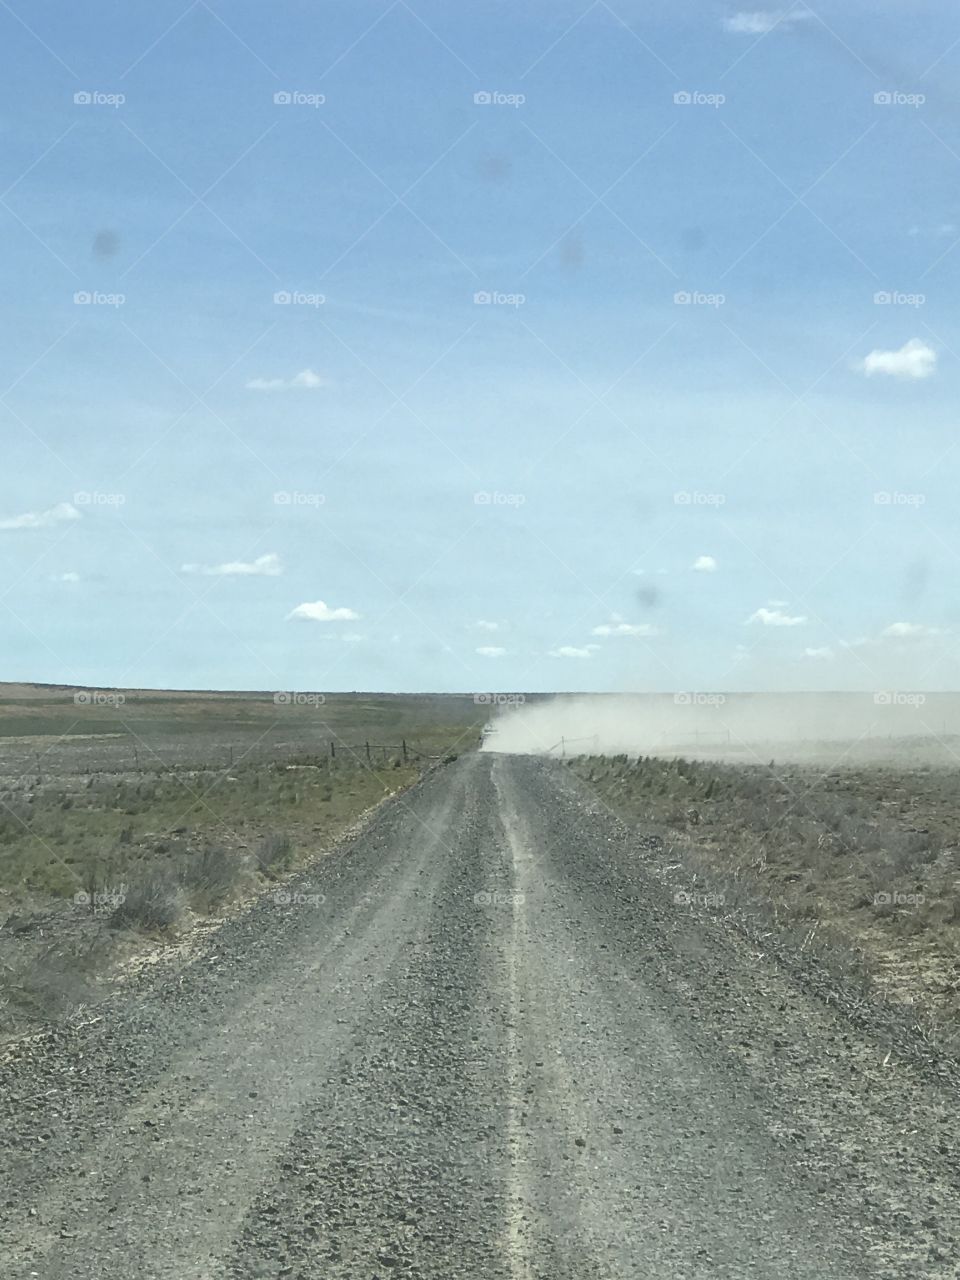 Driving down country dirt road, alone ,isolated dust in the air. Wide open land for as far as you can see.